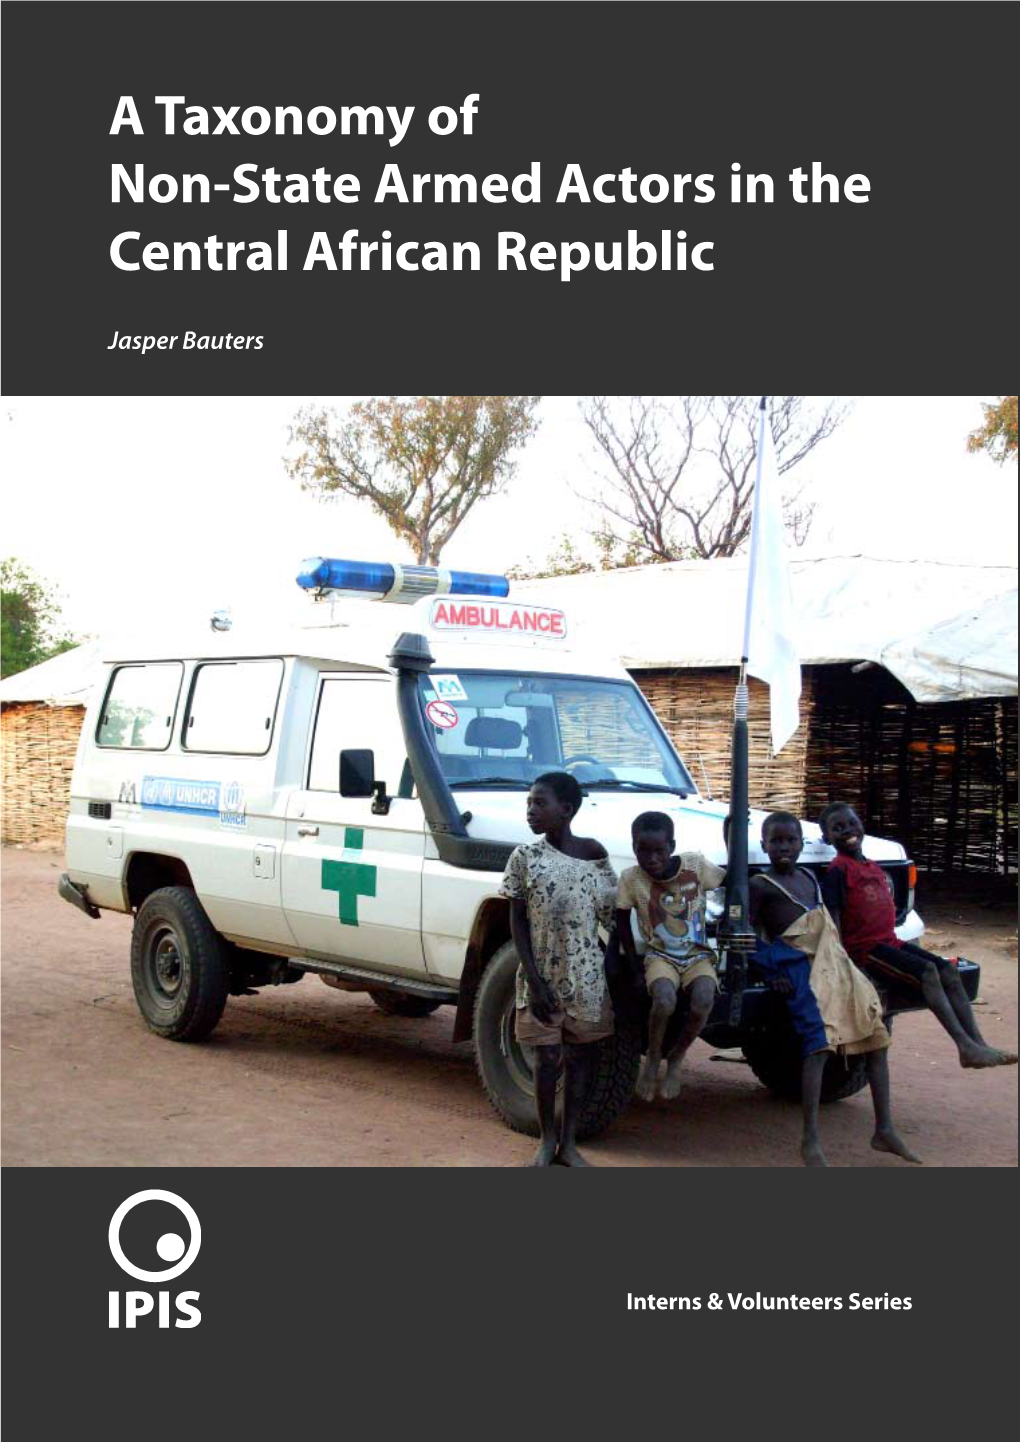 A Taxonomy of Non-State Armed Actors in the Central African Republic